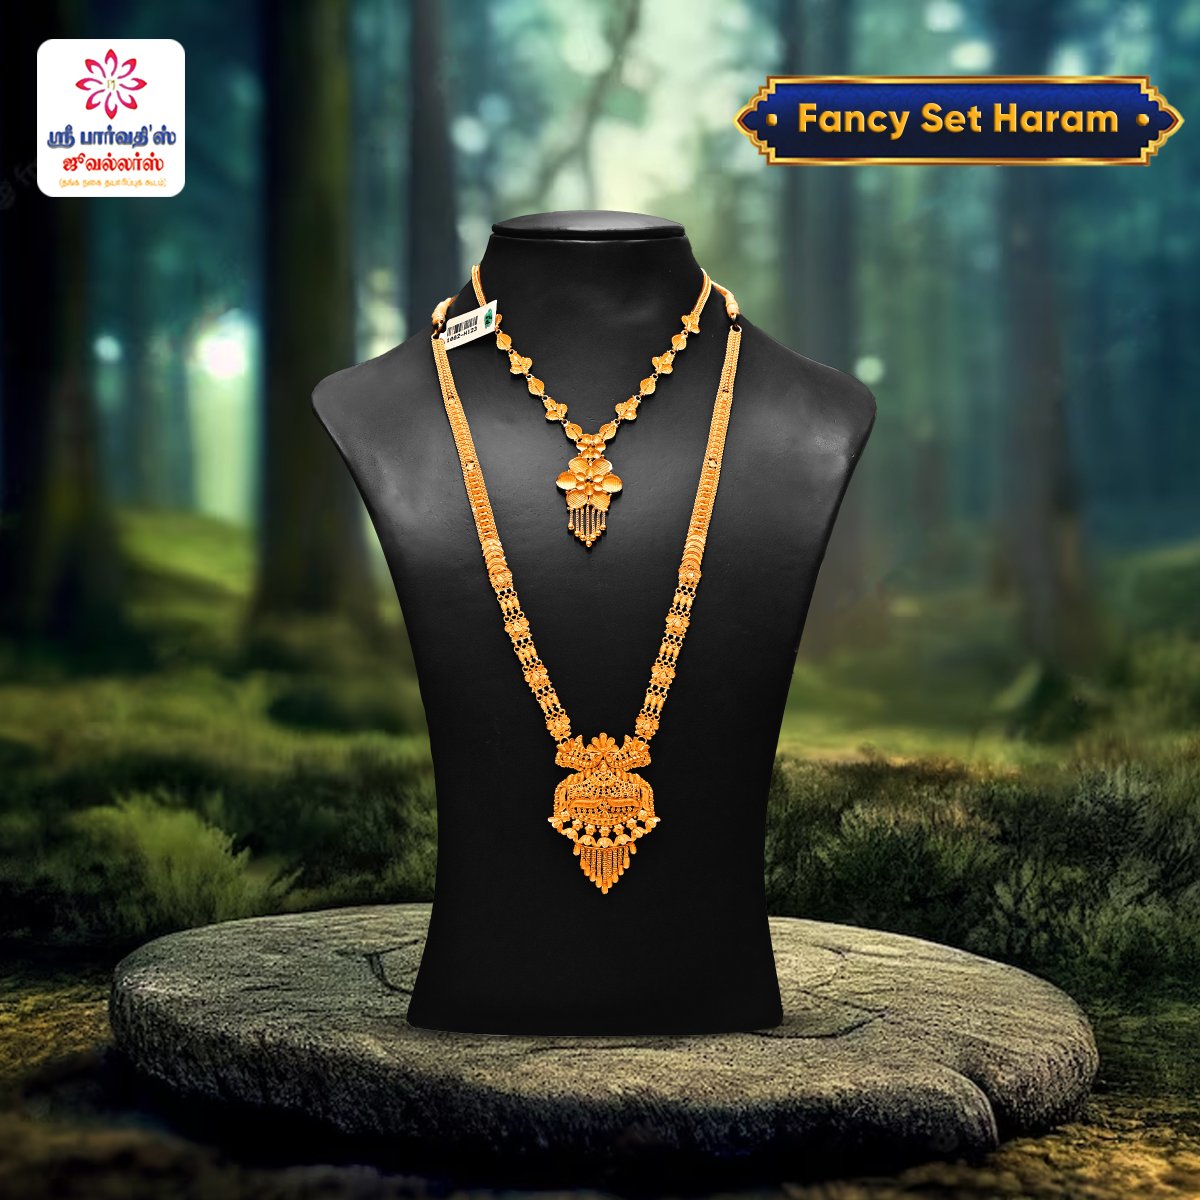 Feel the imposing beauty of Sri Parvathi's Jewellers' fashionable traditional fancy set haram 😍❤️
,
Shop now and elevate your style game! ❤️
,
#SriParvathisJewellery #jewelrylove #SriParvathisJewellers #feelinglikequeen